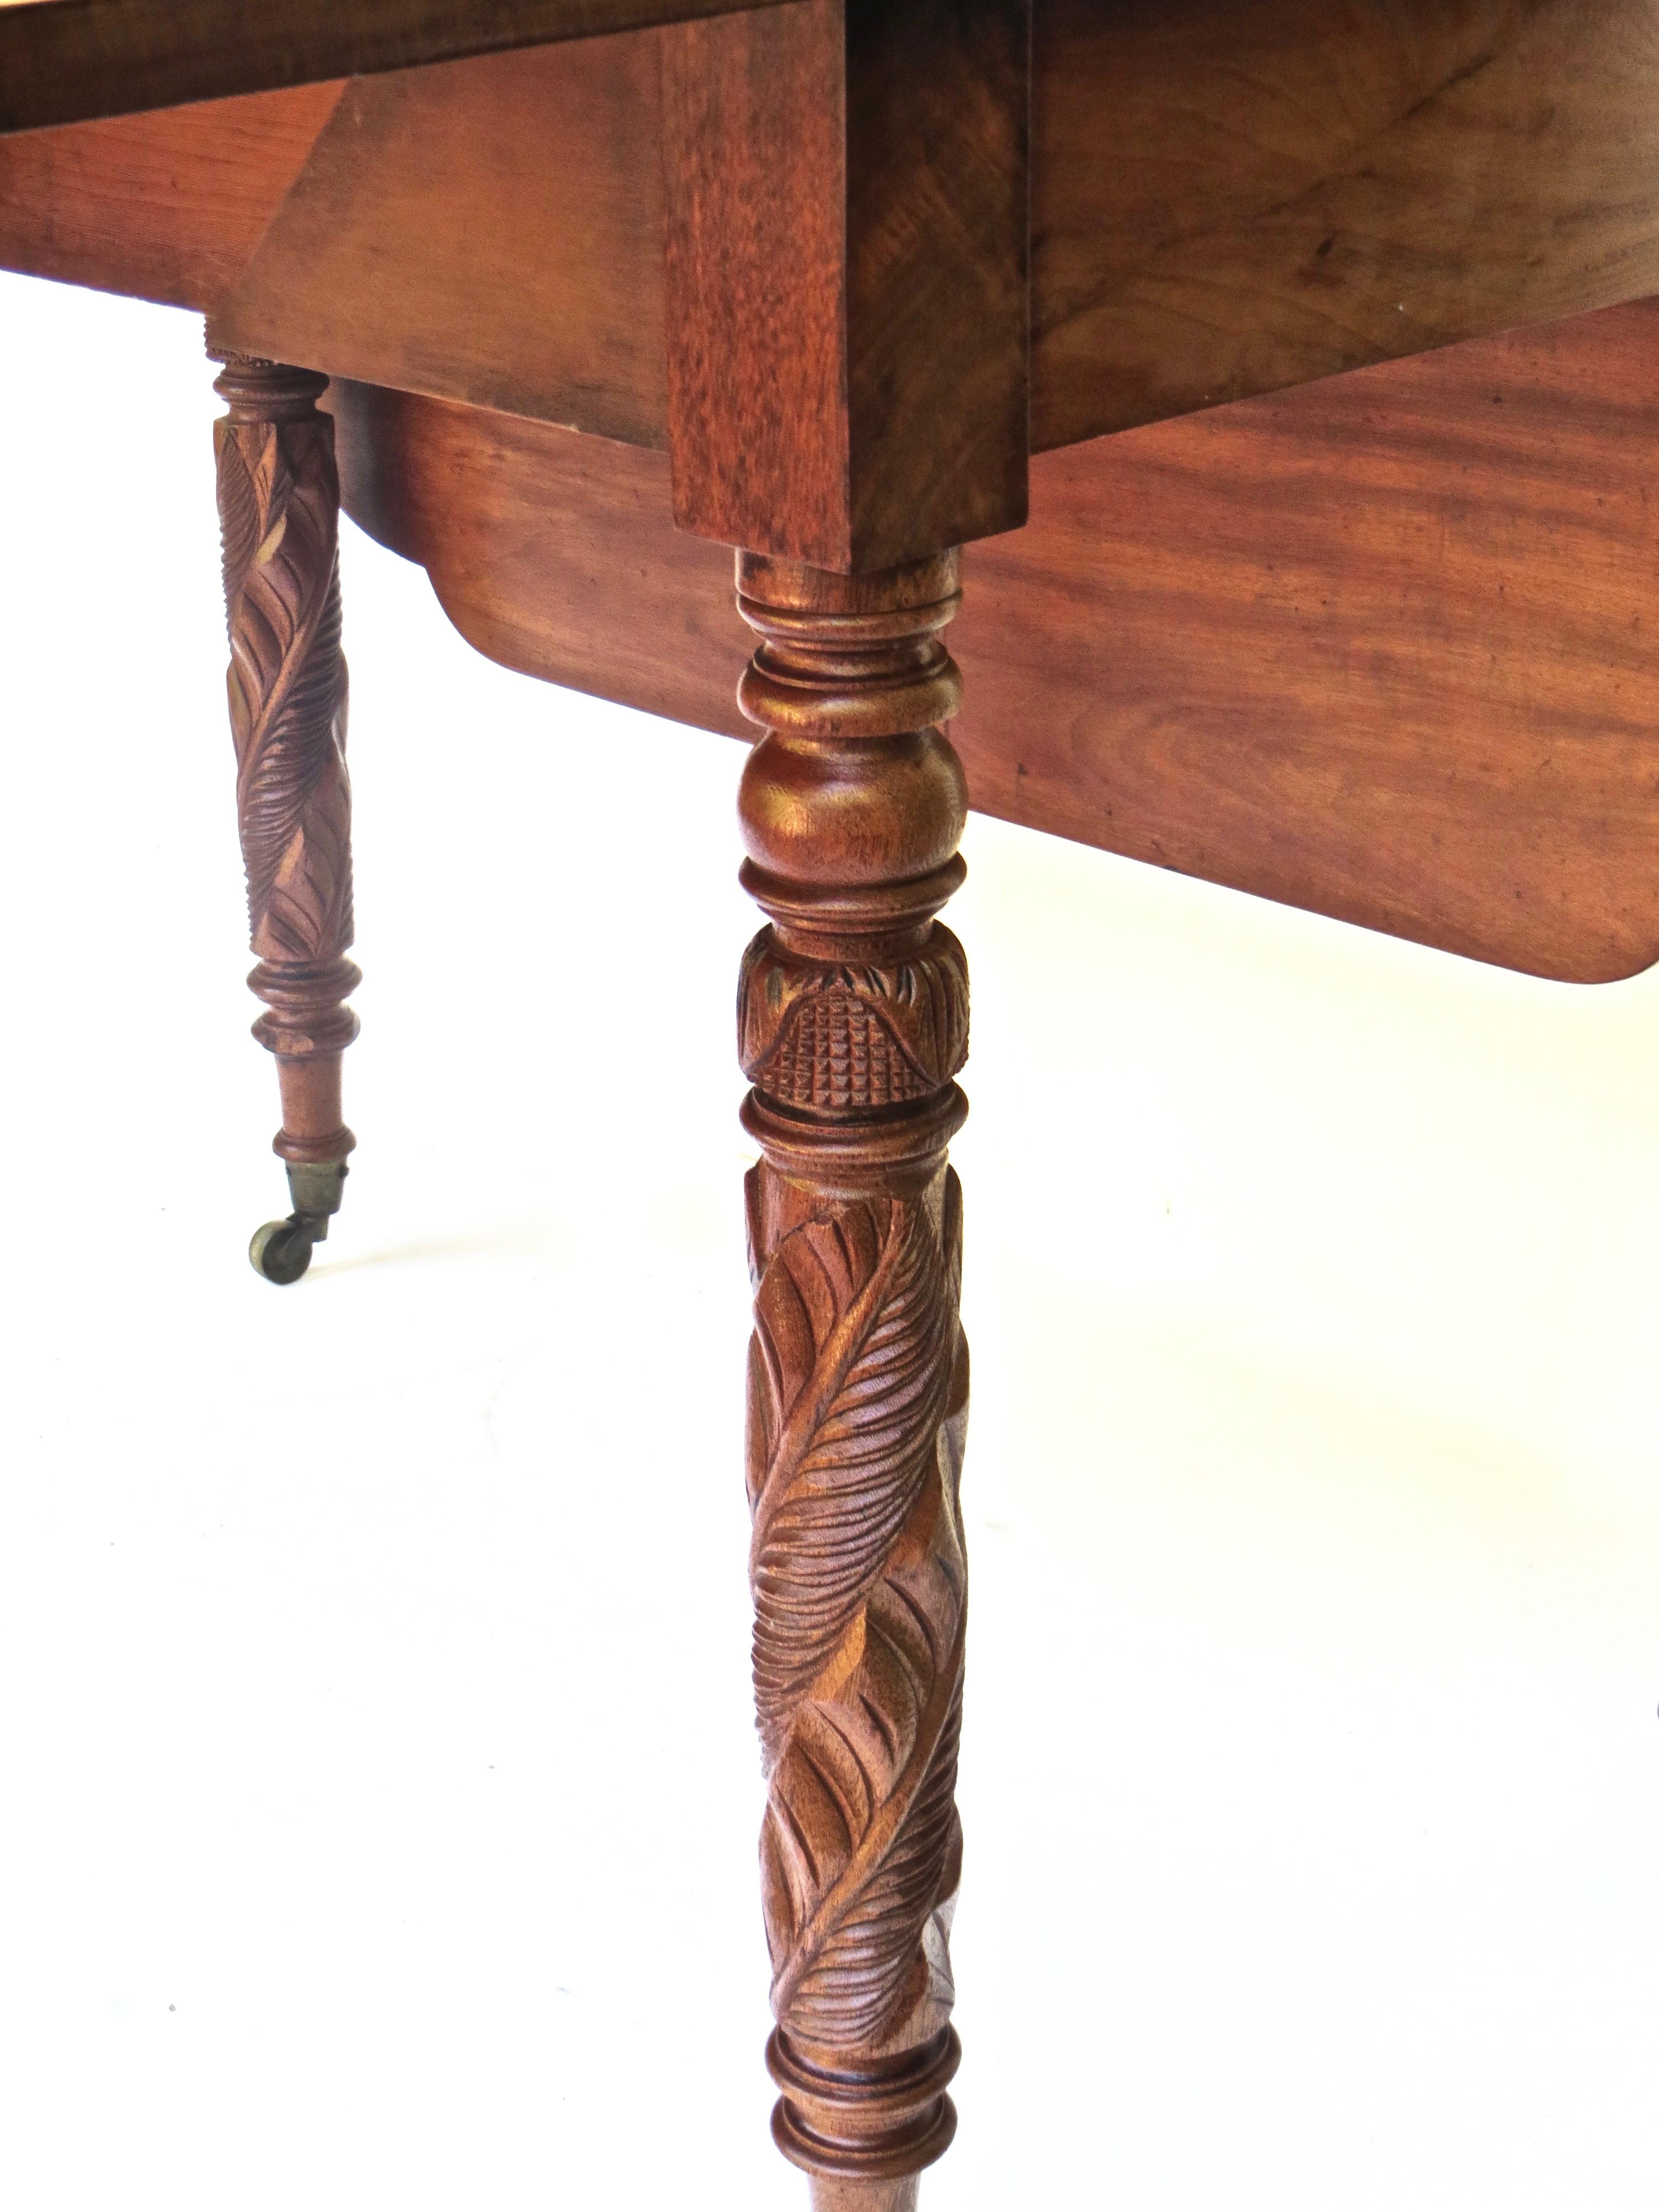 value of antique cherry drop leaf table